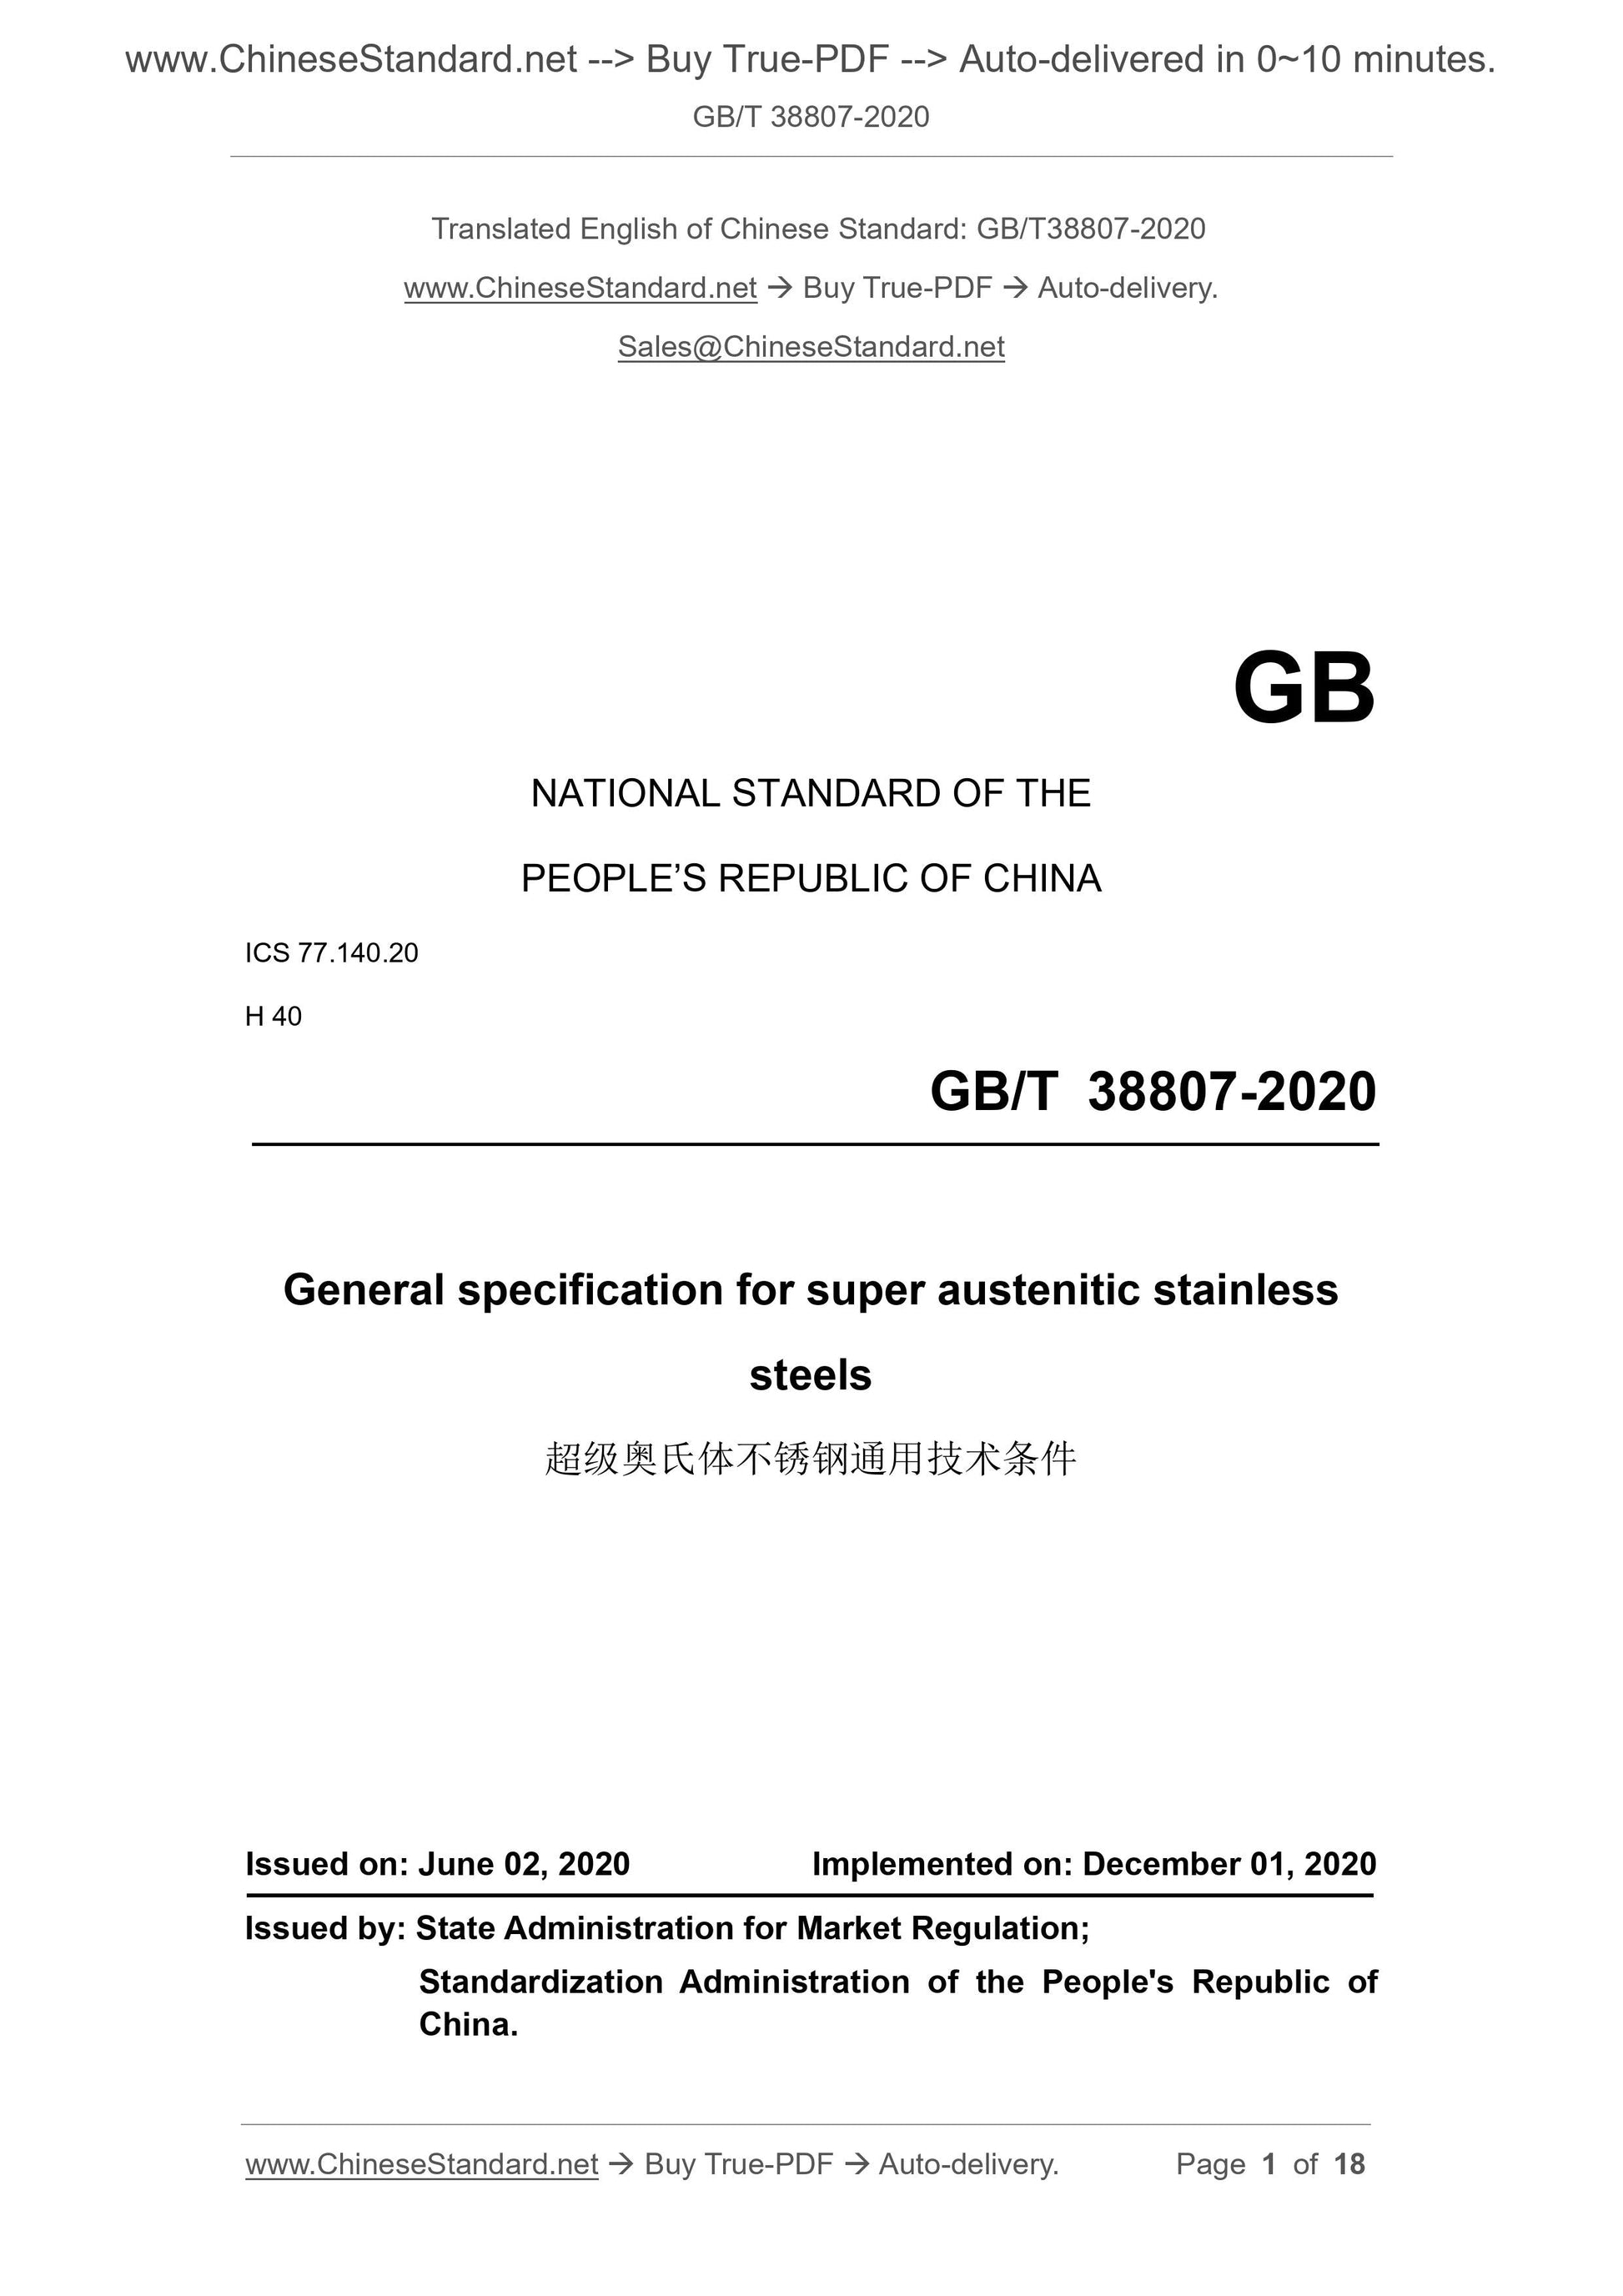 GB/T 38807-2020 Page 1